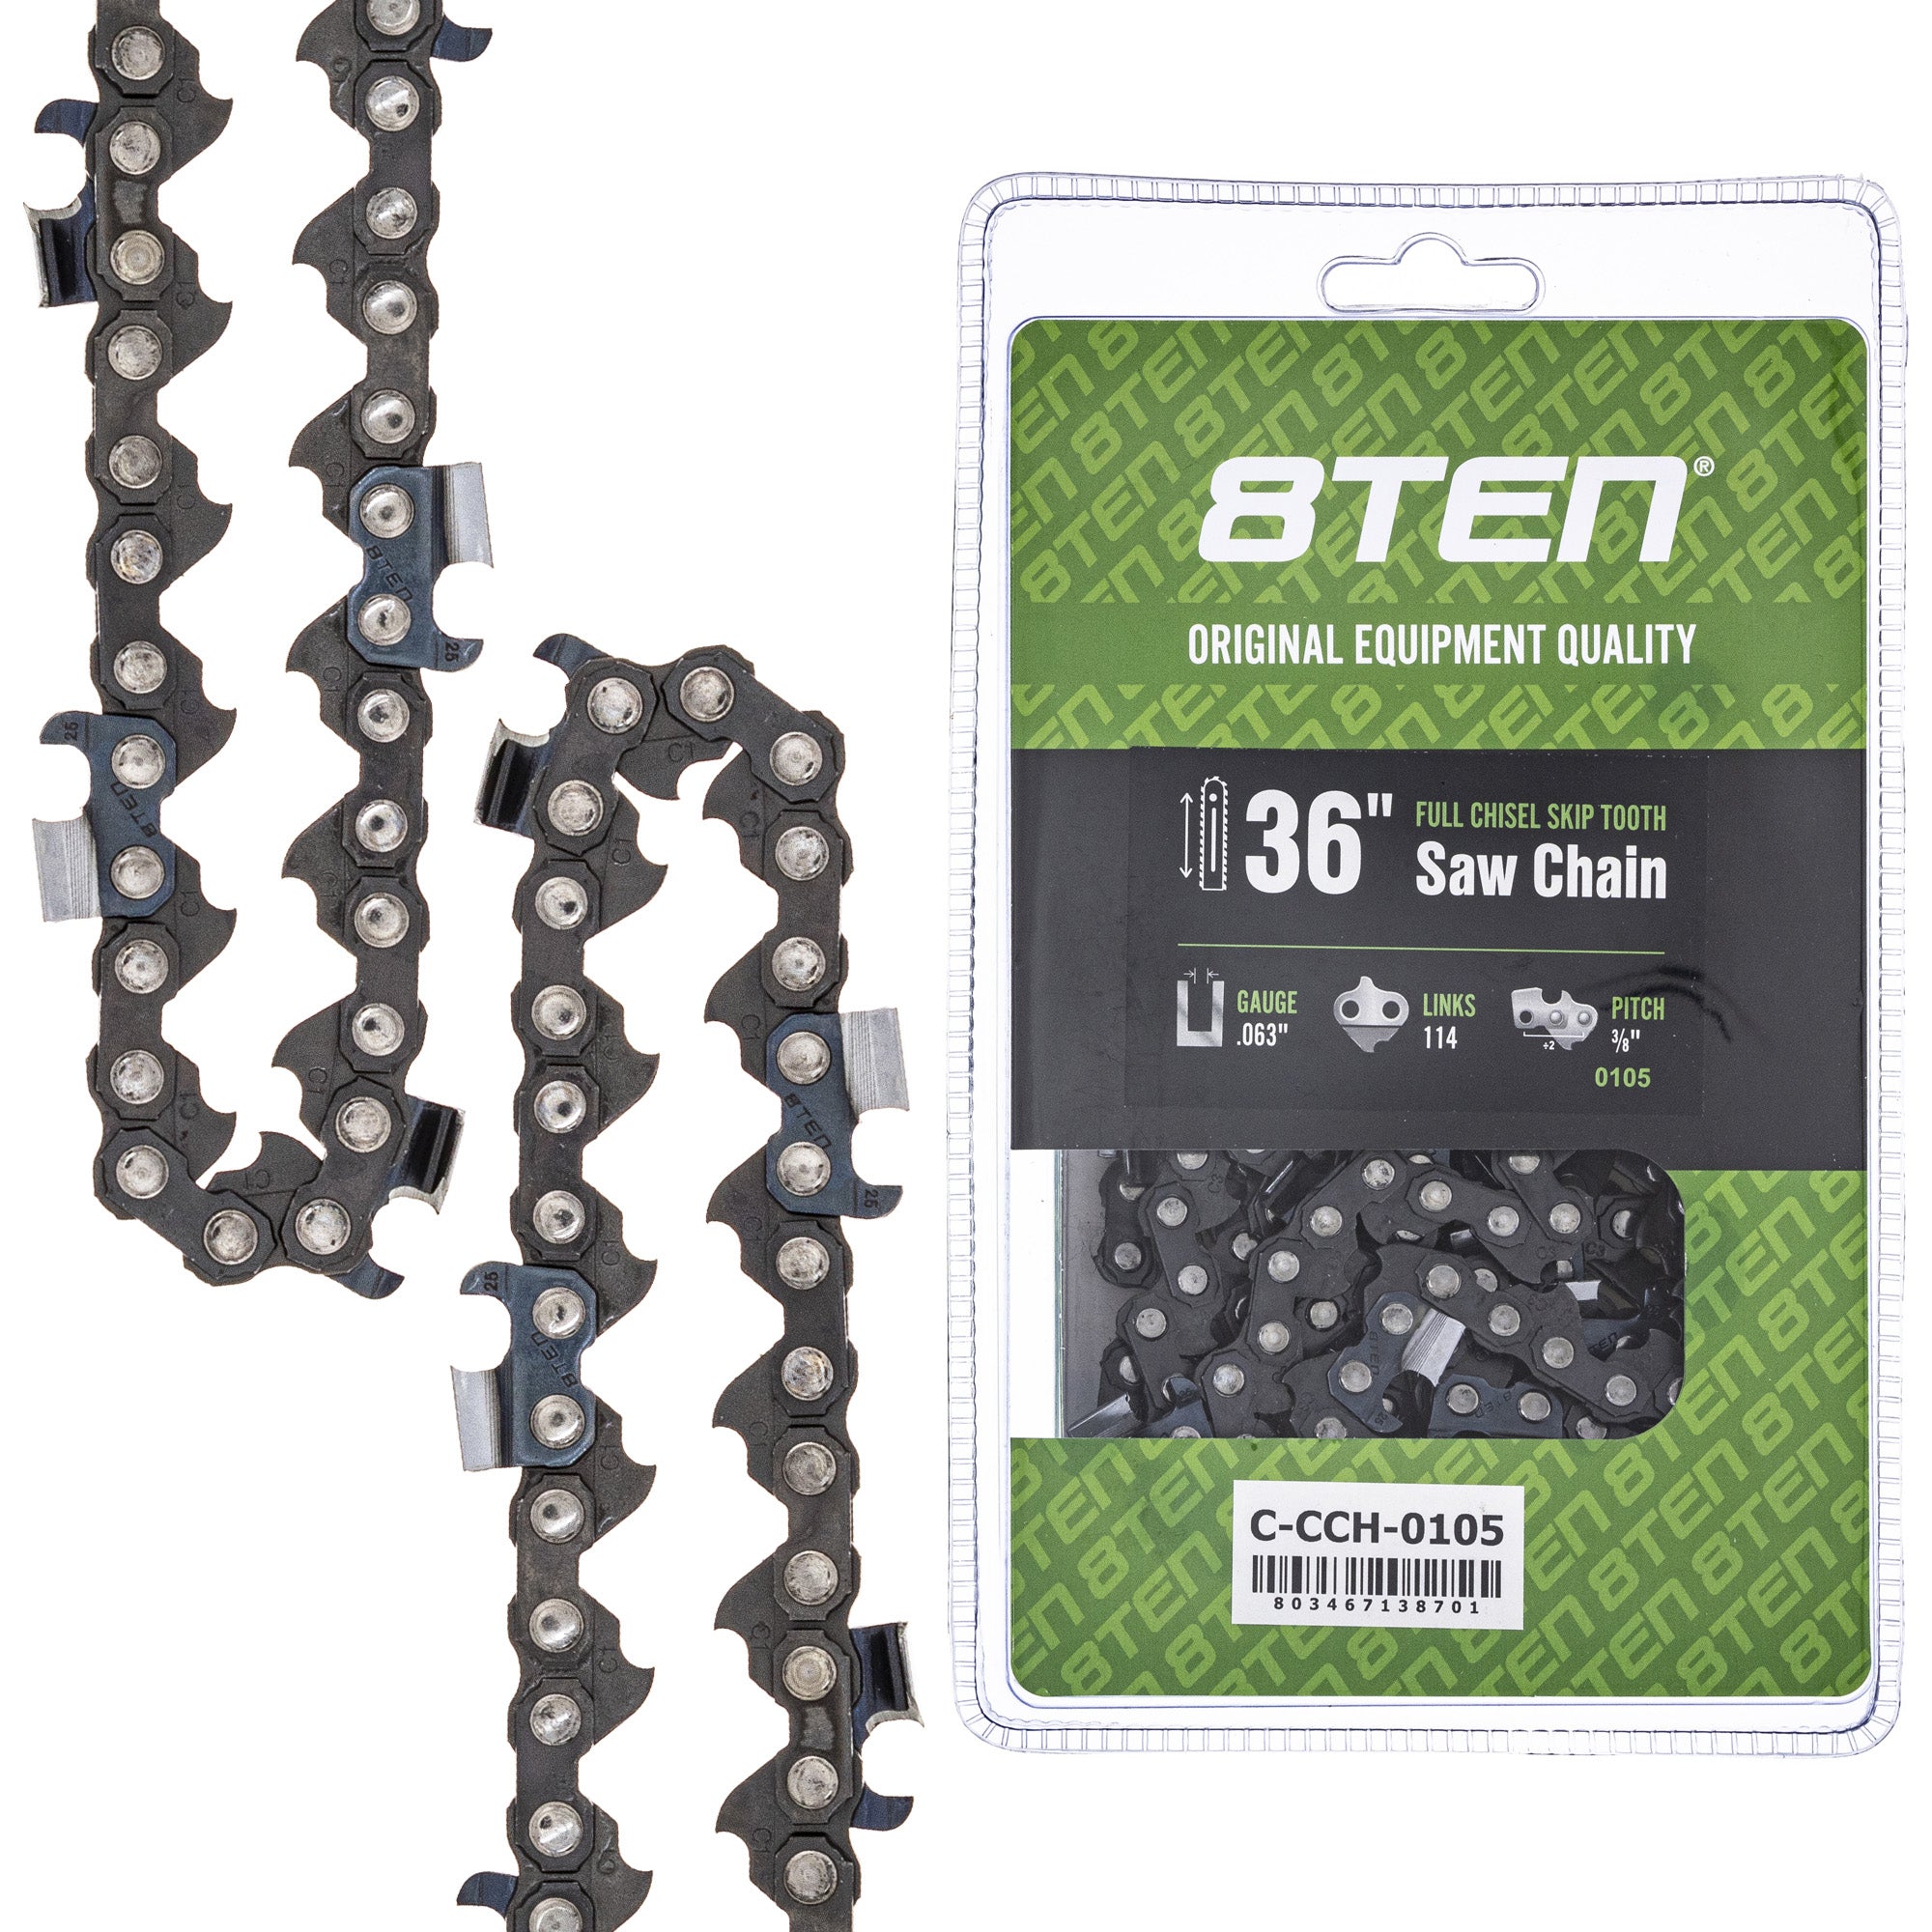 8TEN MK1010292 Guide Bar & Chain for MSE MS E 634